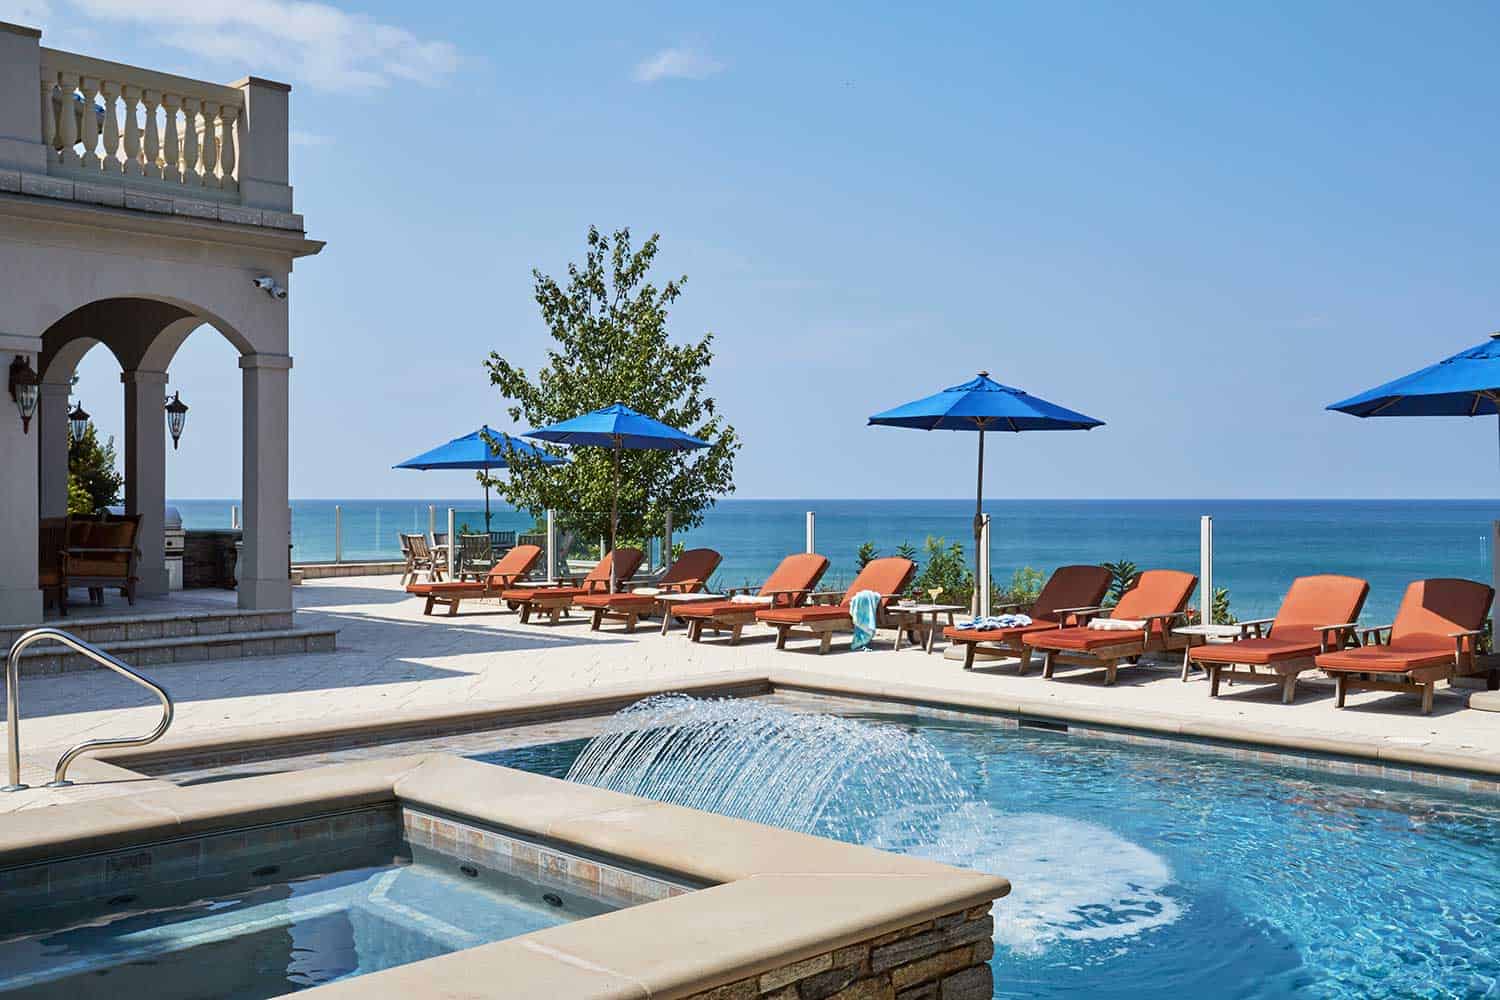 relax-by-the-pool-enjoy-lake-views-harbor-country-michigan